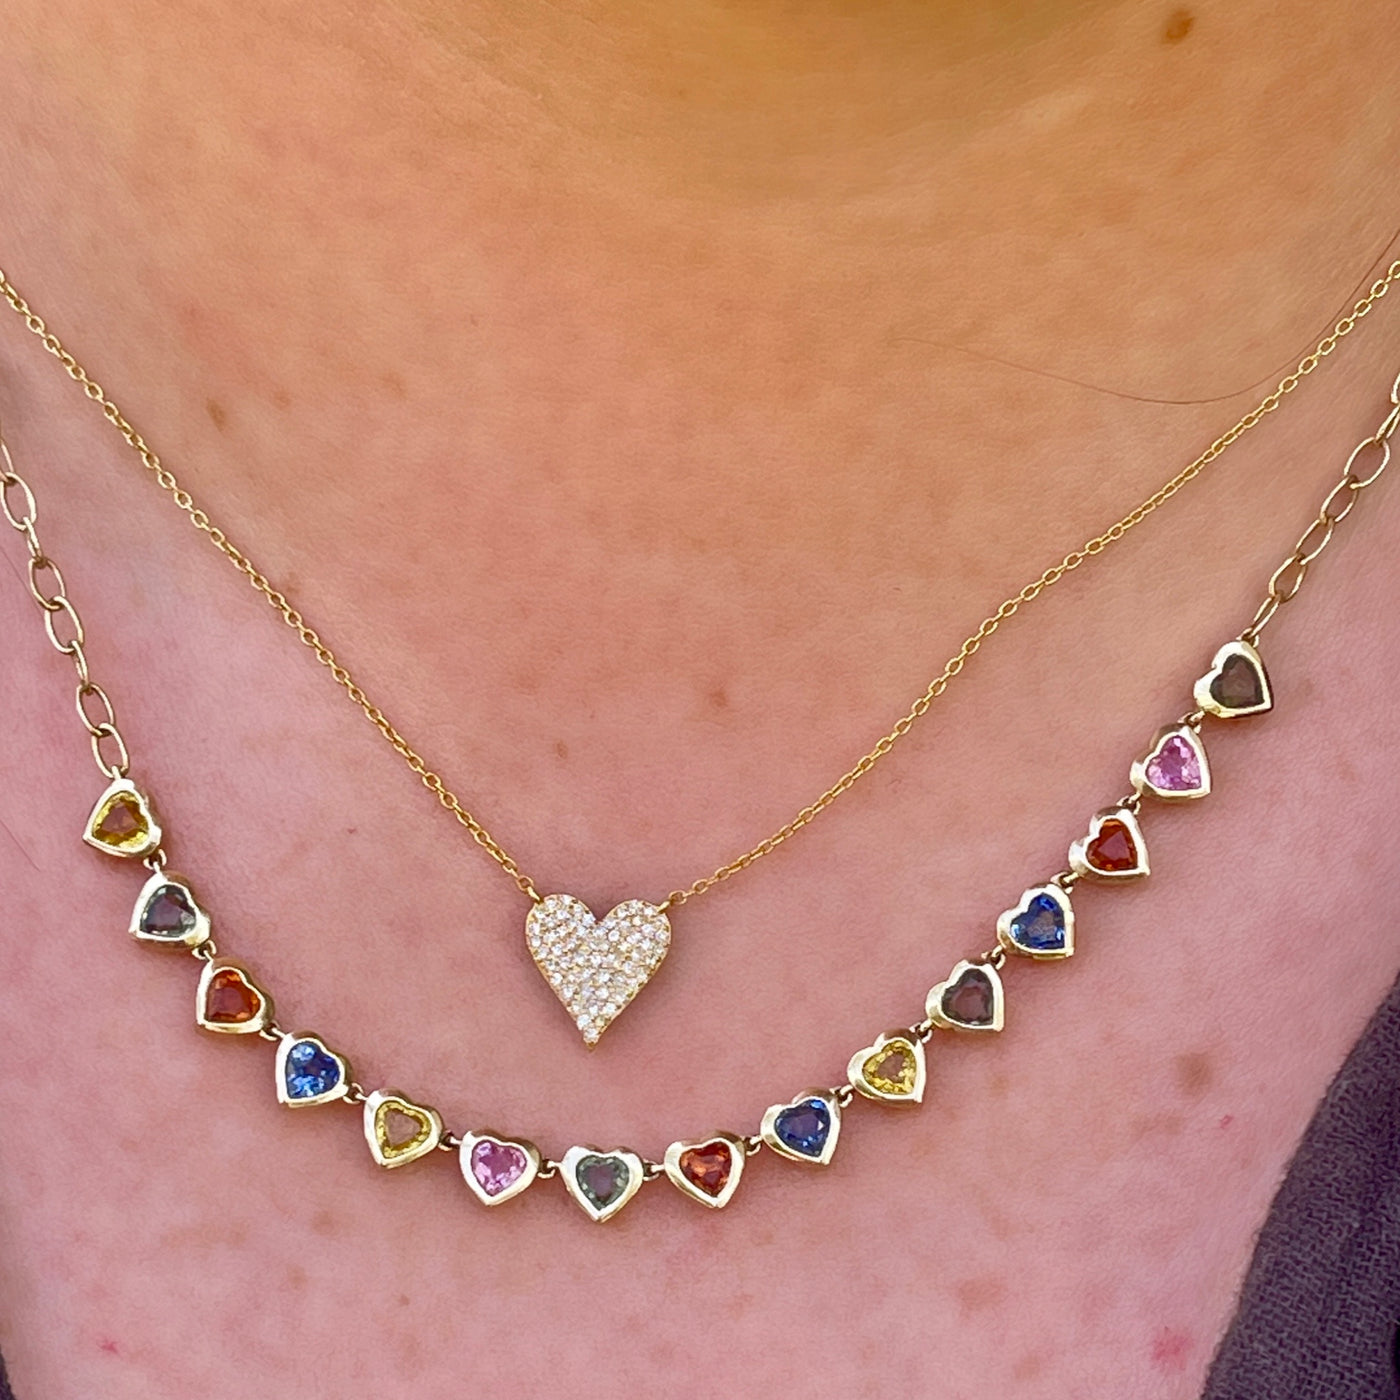 Blue Sapphire and White Diamond Reversible Heart Necklace